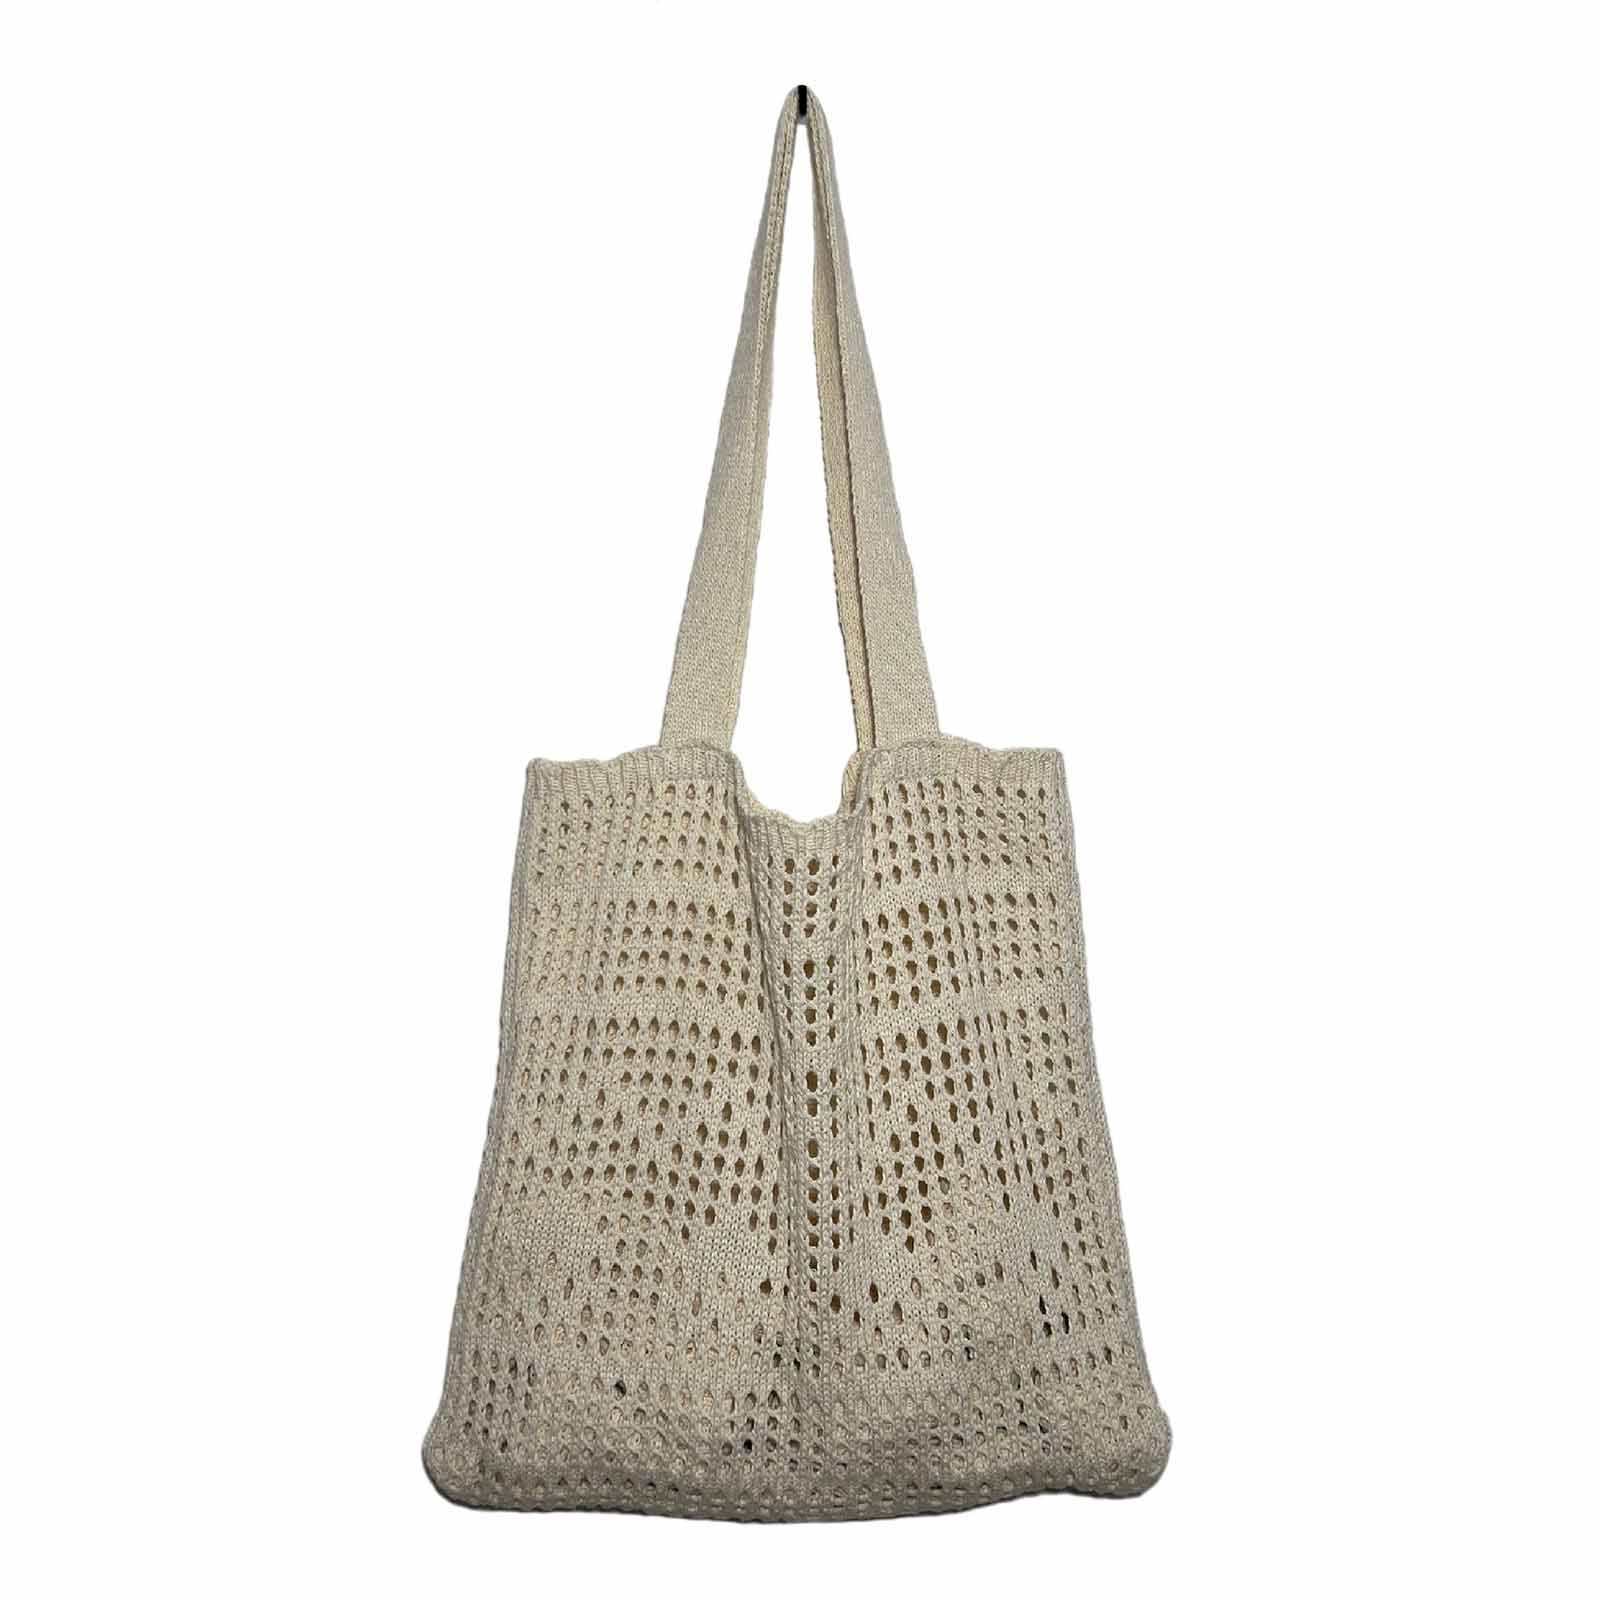 WOXINDA Knitted Made Knitting Bags Travel Mesh Bags Straw Bags Women's  Country Style Knitting Bags Beach Bags